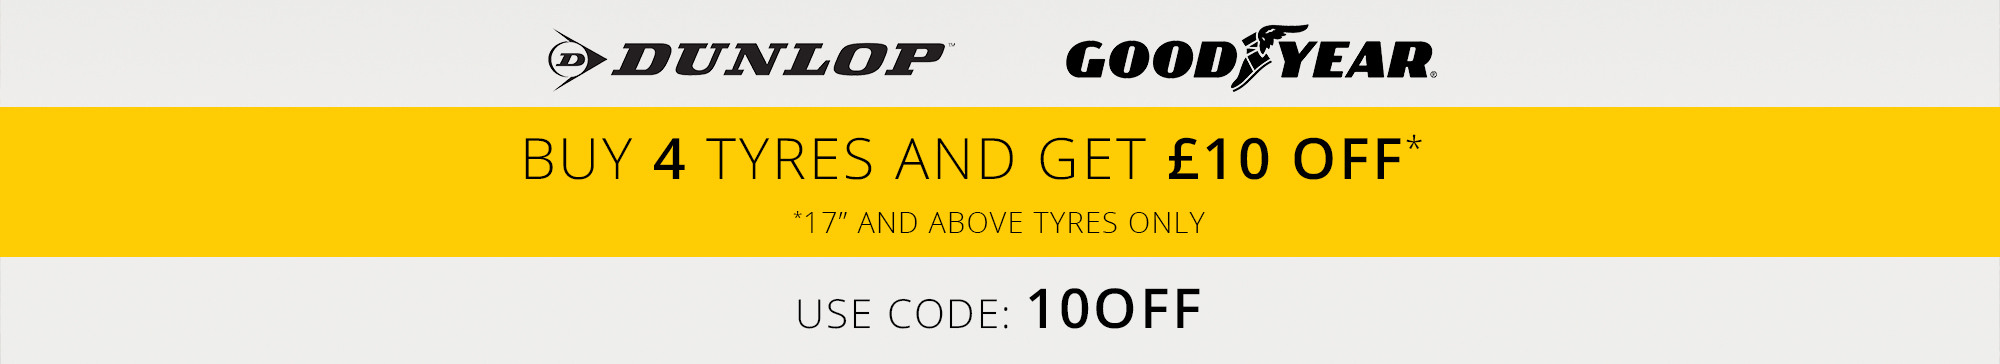 Goodyear Dunlop Promotion £5 off